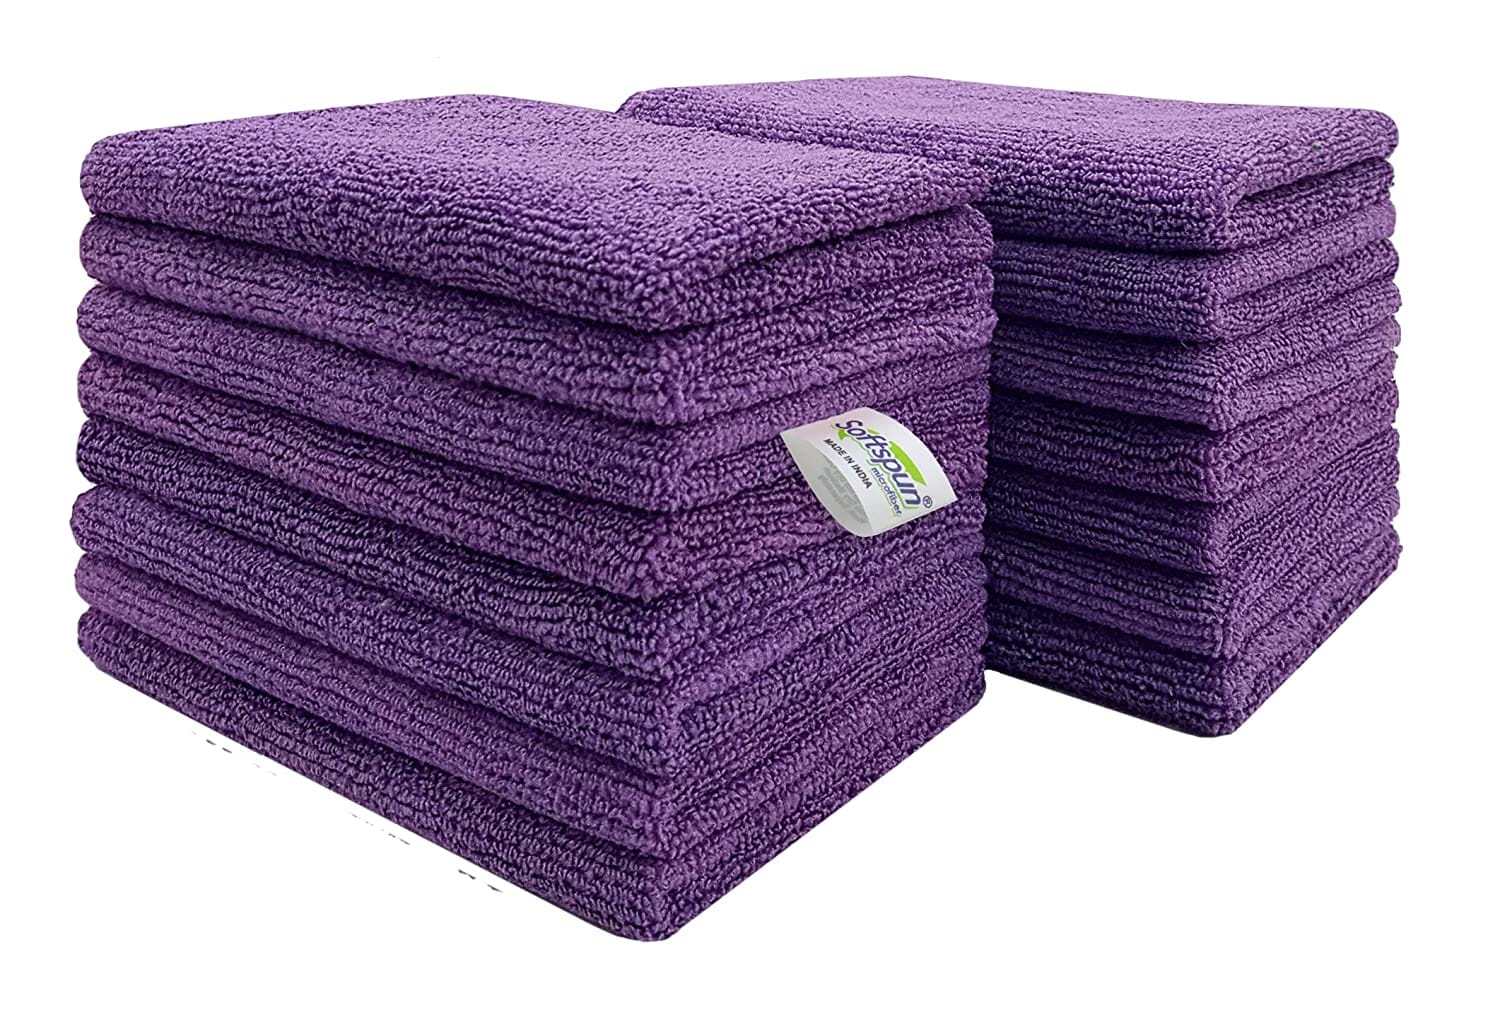 SOFTSPUN Microfiber Small Wipes 20x30 Cms, 15 Piece Towel Set, 340 GSM Multi-Purpose Super Soft Absorbent Cleaning Towels, Cleans & Polishes Everything in Your Home, Kitchen & Office.